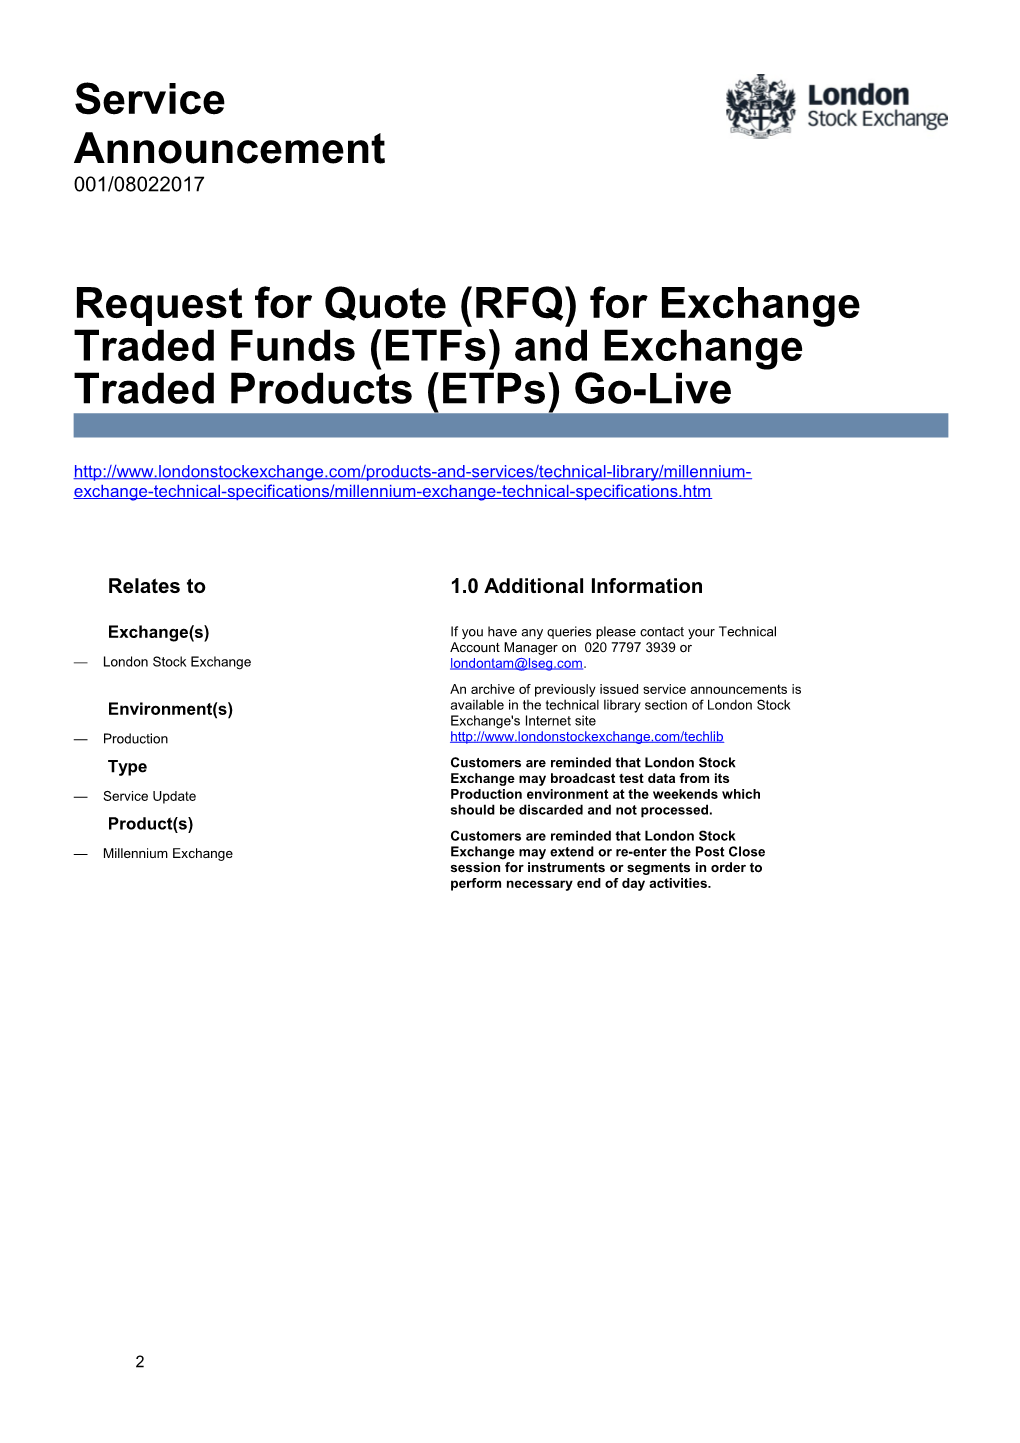 Request for Quote (RFQ) for Exchange Traded Funds (Etfs) and Exchange Traded Products (Etps)